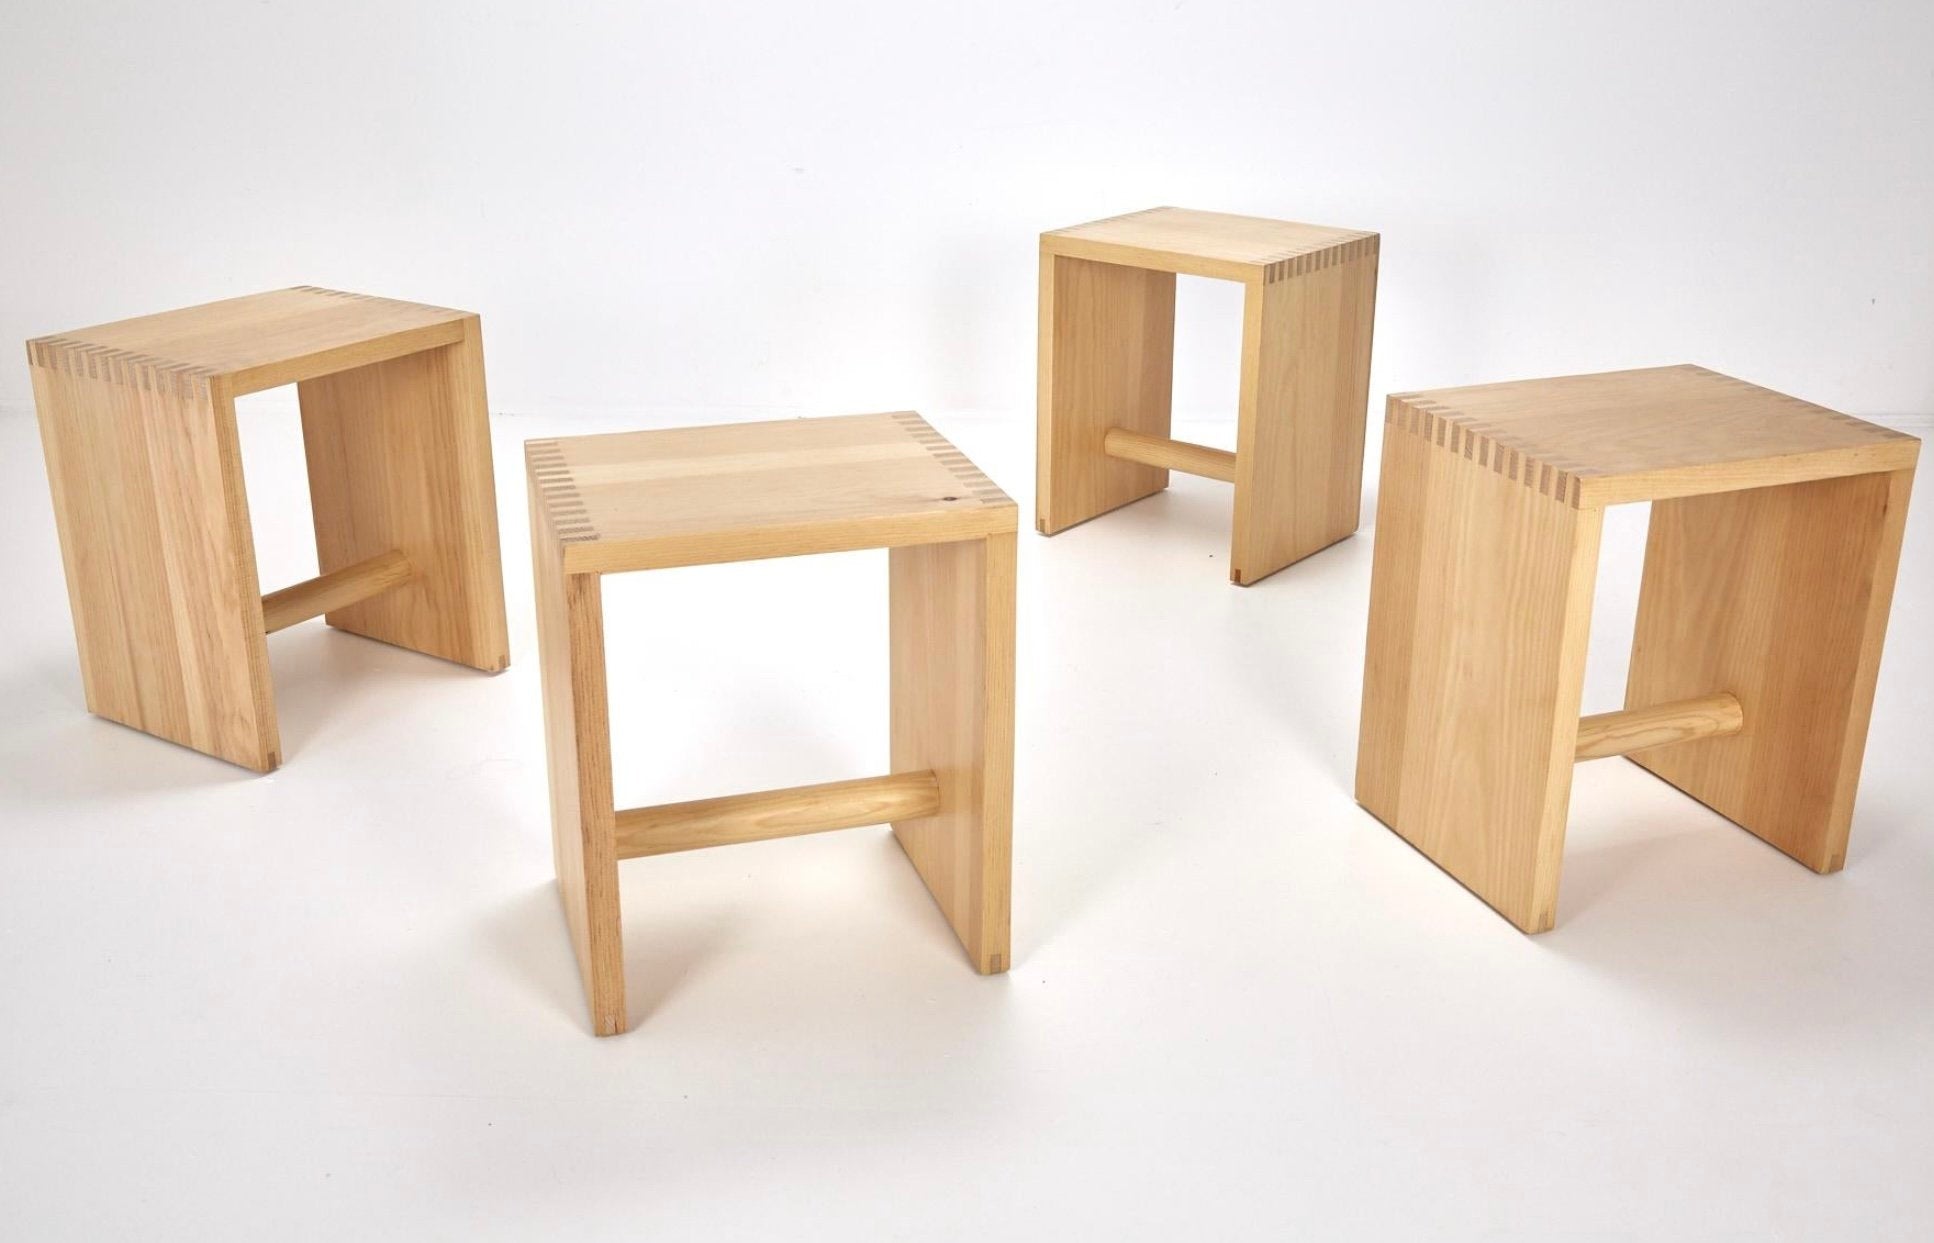 PAIR OF SOLID PINE RECTILINEAR SIDE TABLES / STOOLS